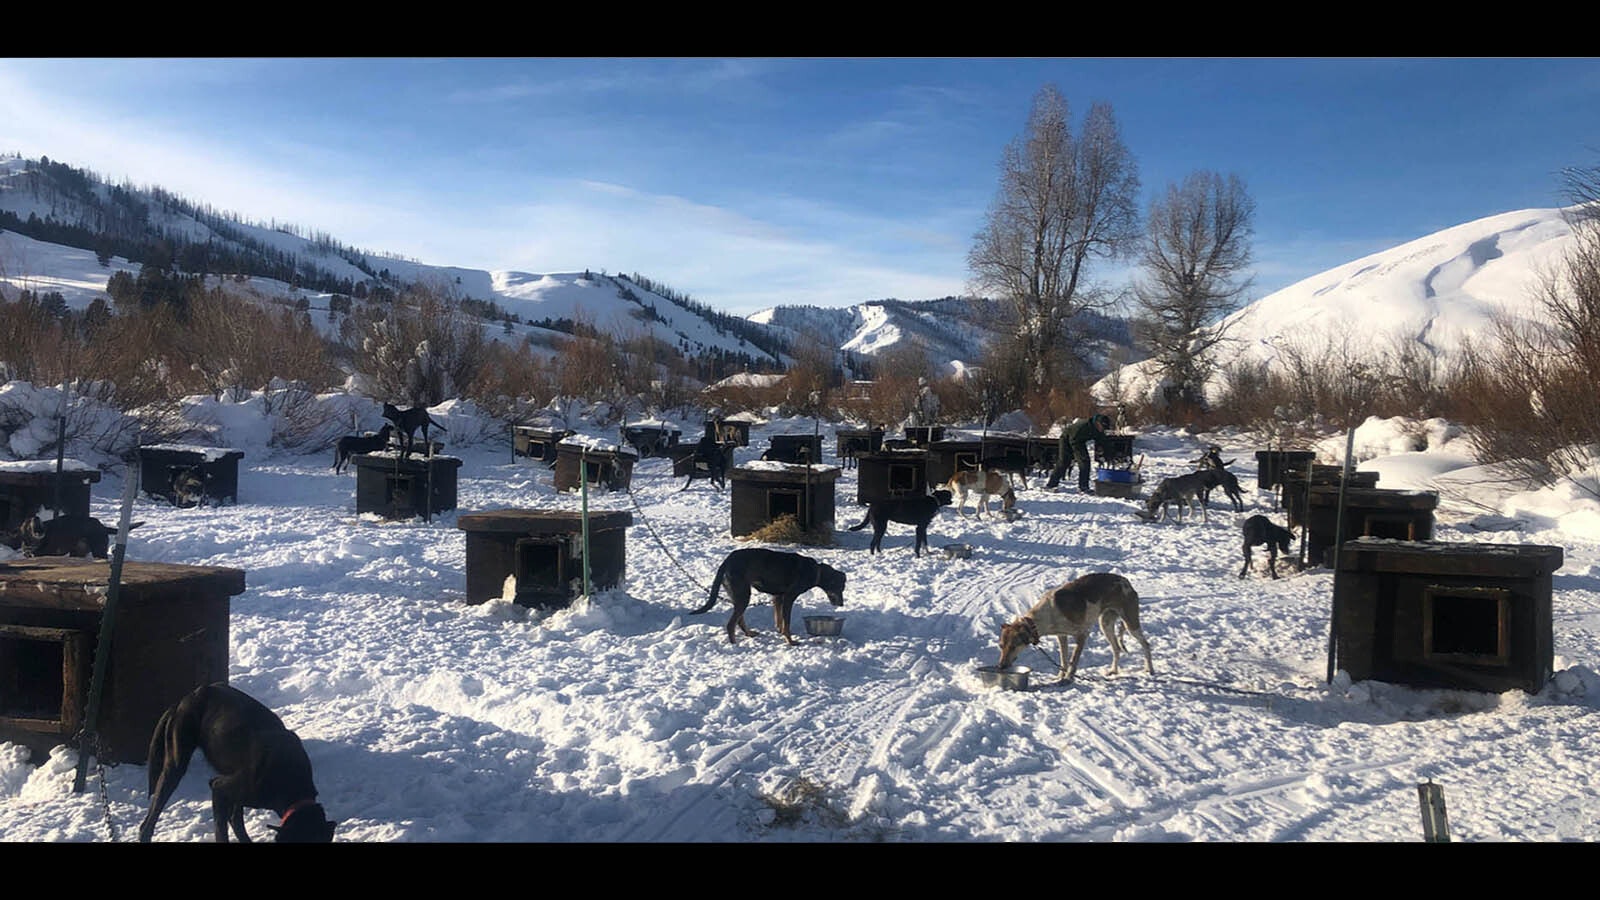 At Jackson Hole Iditarod headquarters, Frank Teasley owns some 203 dogs at his place in Granite Creek.